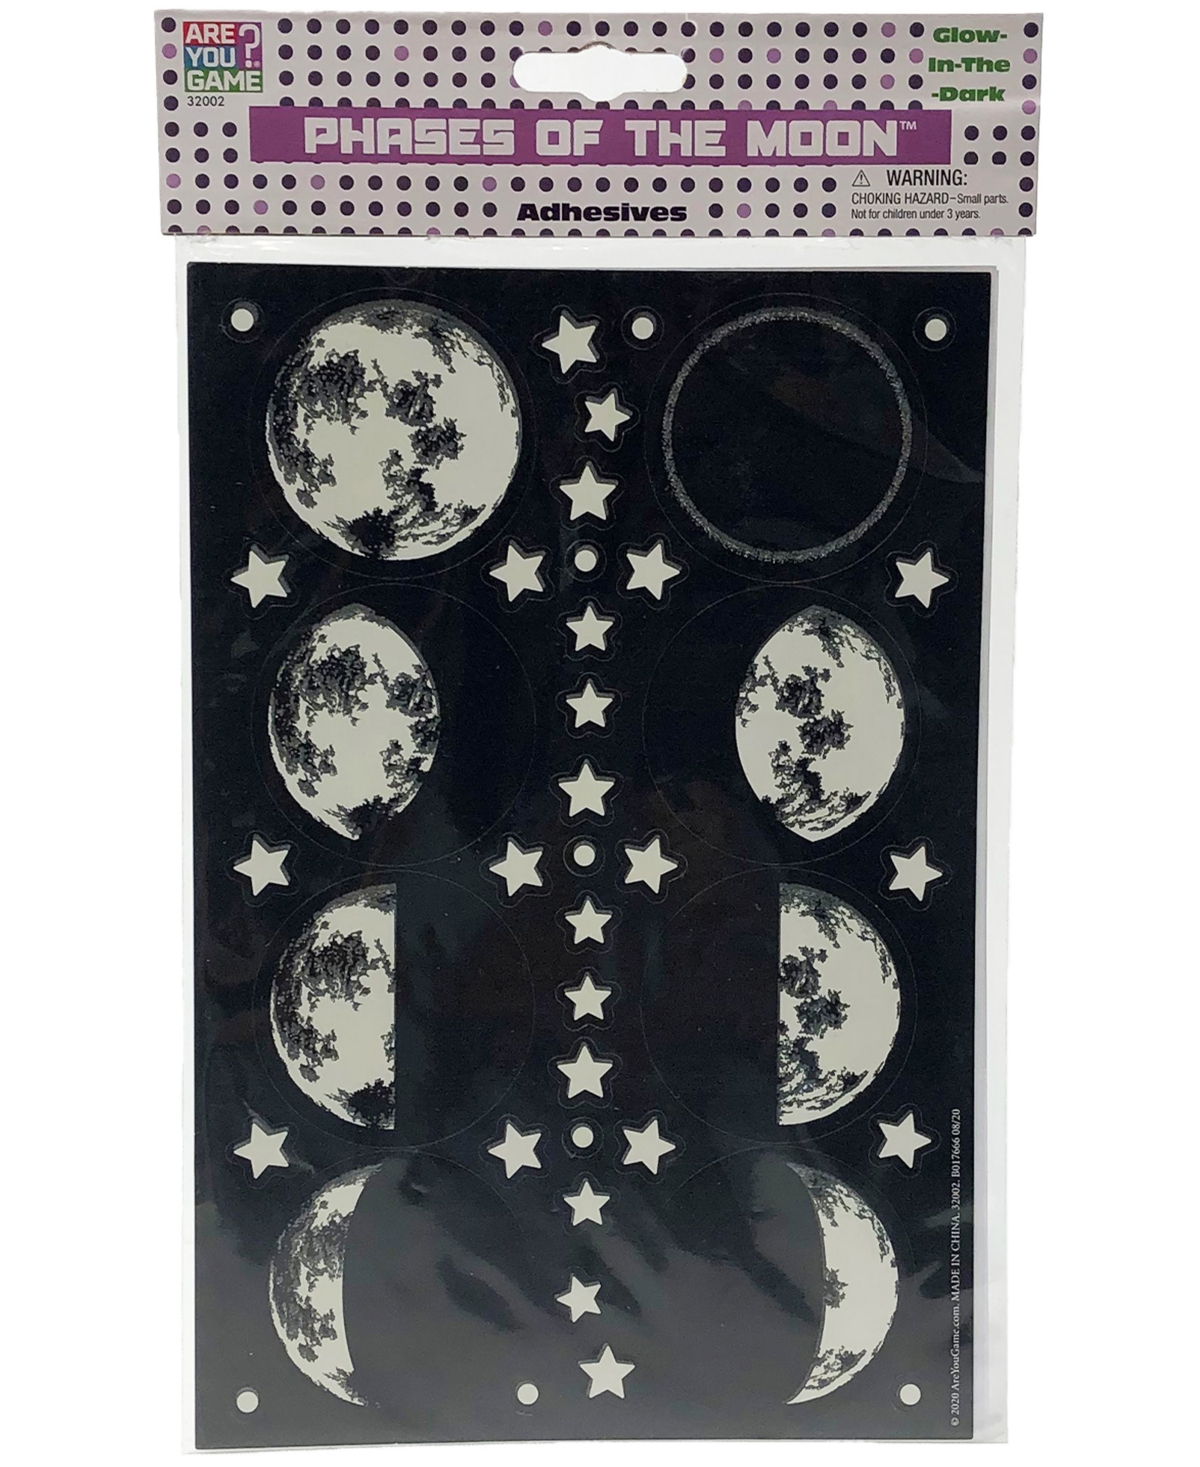 Areyougame Kids' Glow-in-the-dark Phases Of The Moon Adhesives In No Color